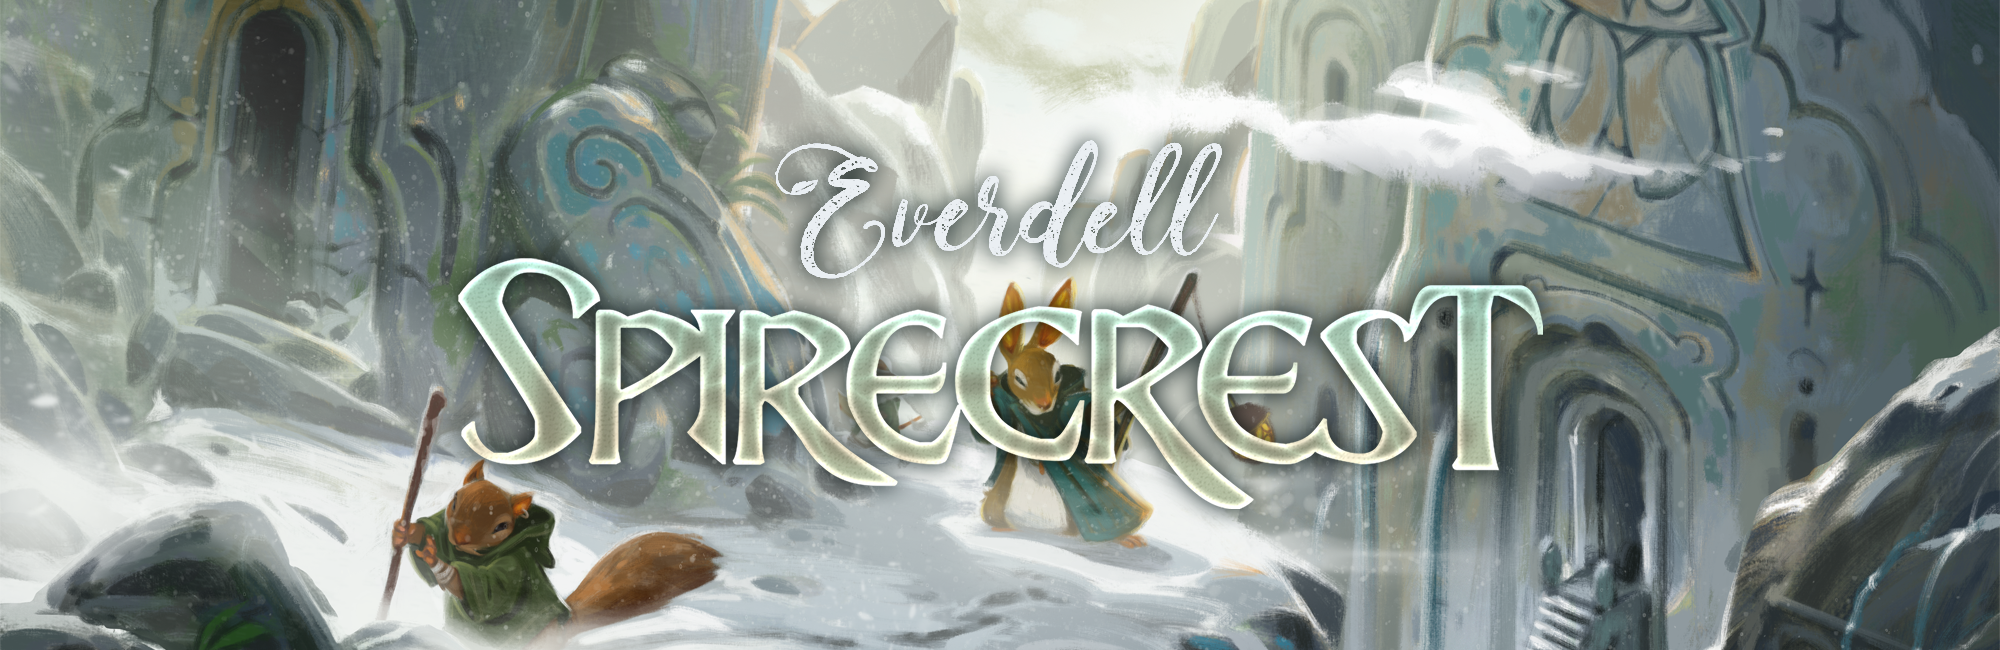 Enjoy the frozen mountains of the Spirecrest Everdell's second expansion